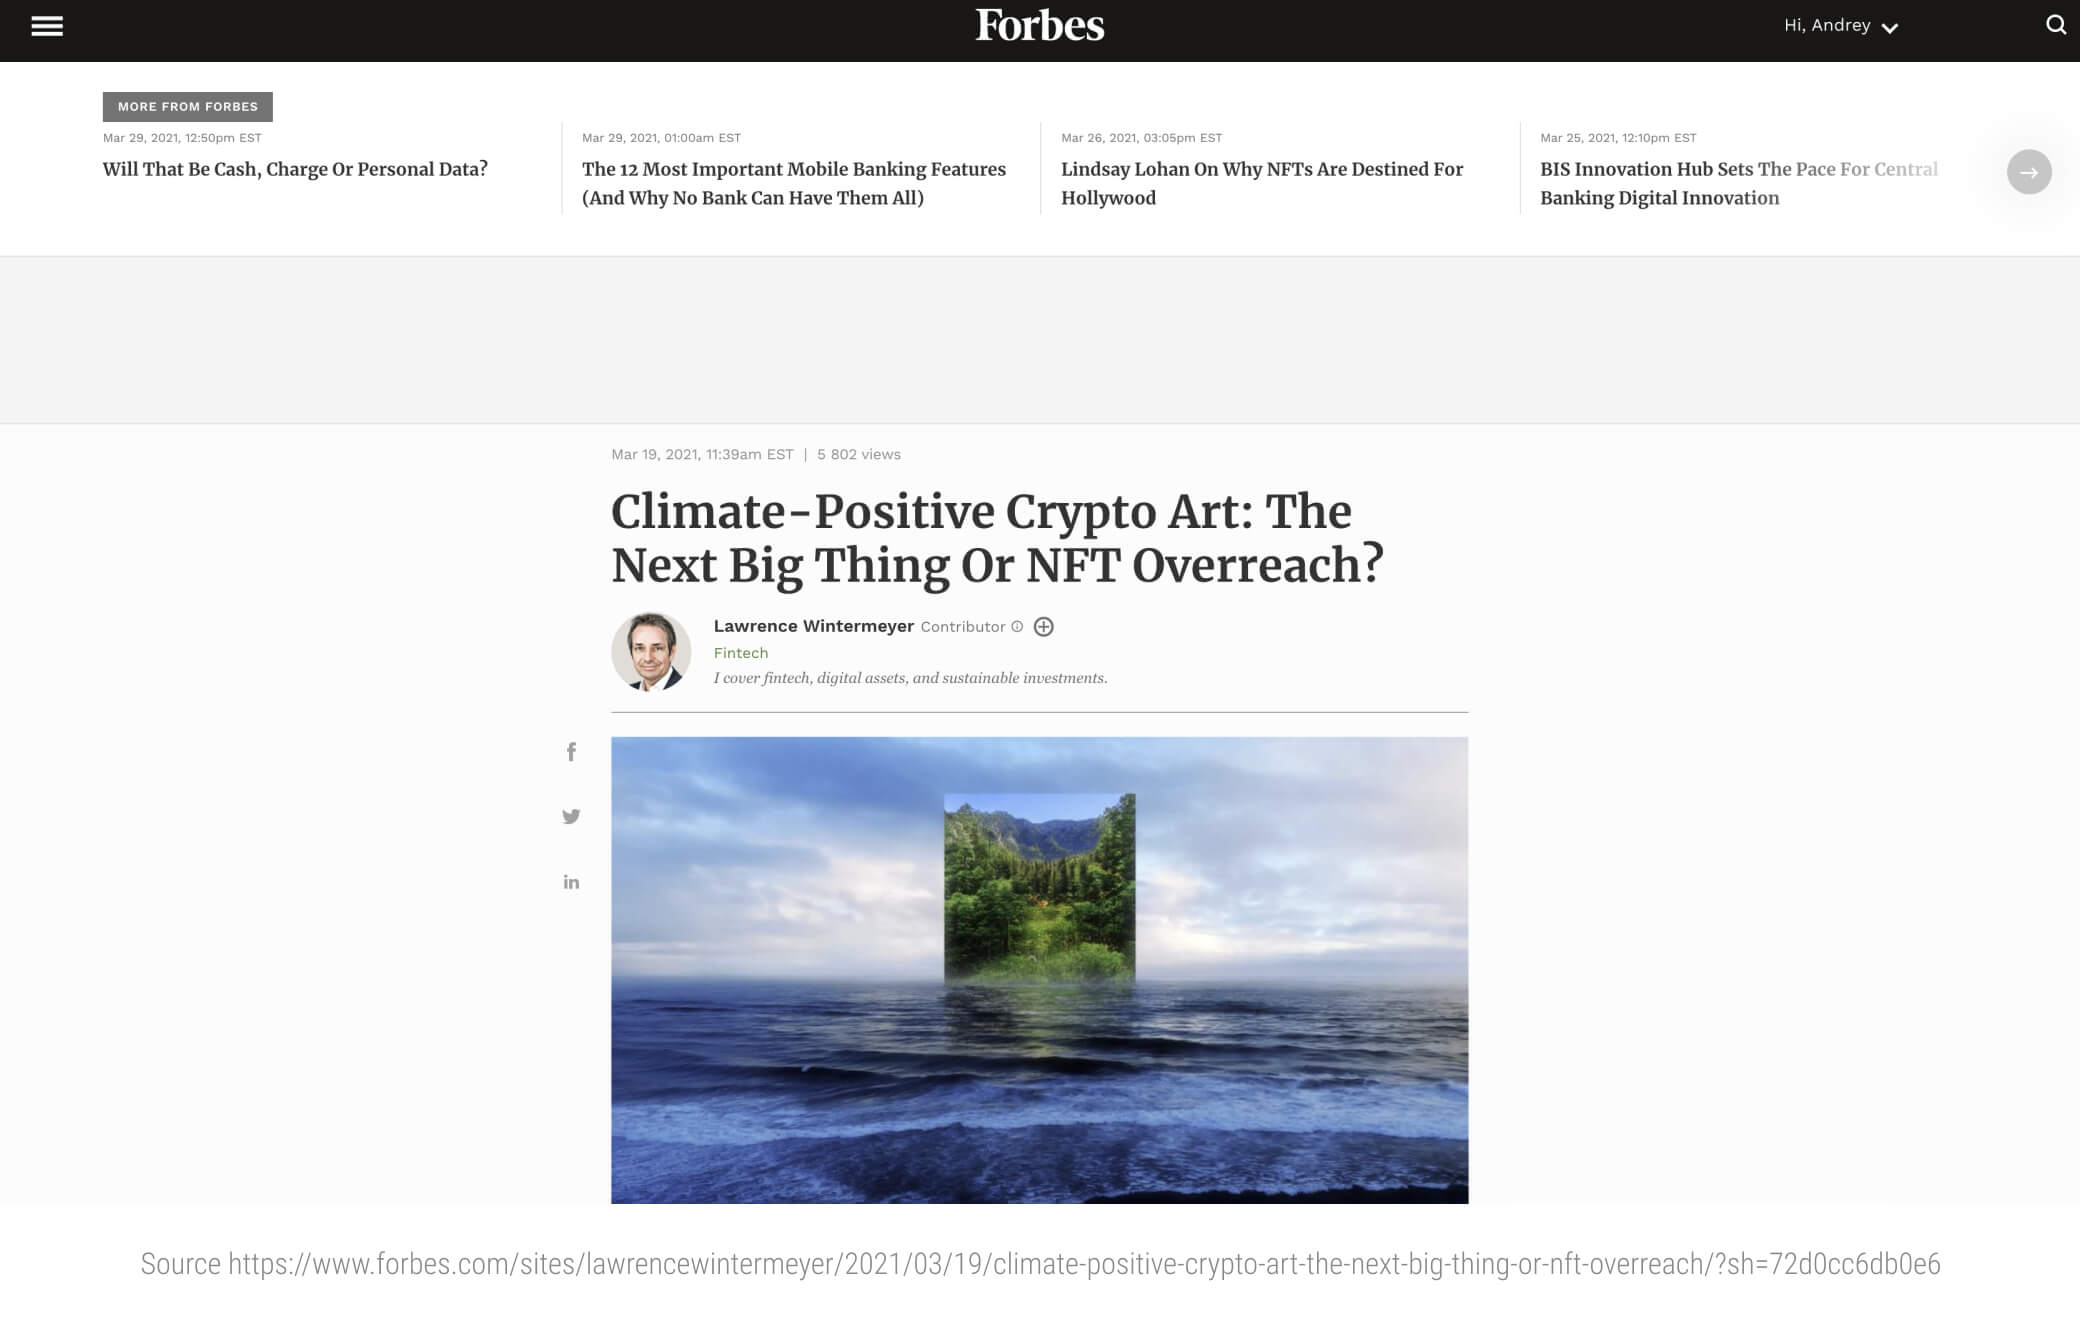 Climate-Positive-Crypto-Art_-The-Next-Big-Thing-Or-NFT-Overreach_